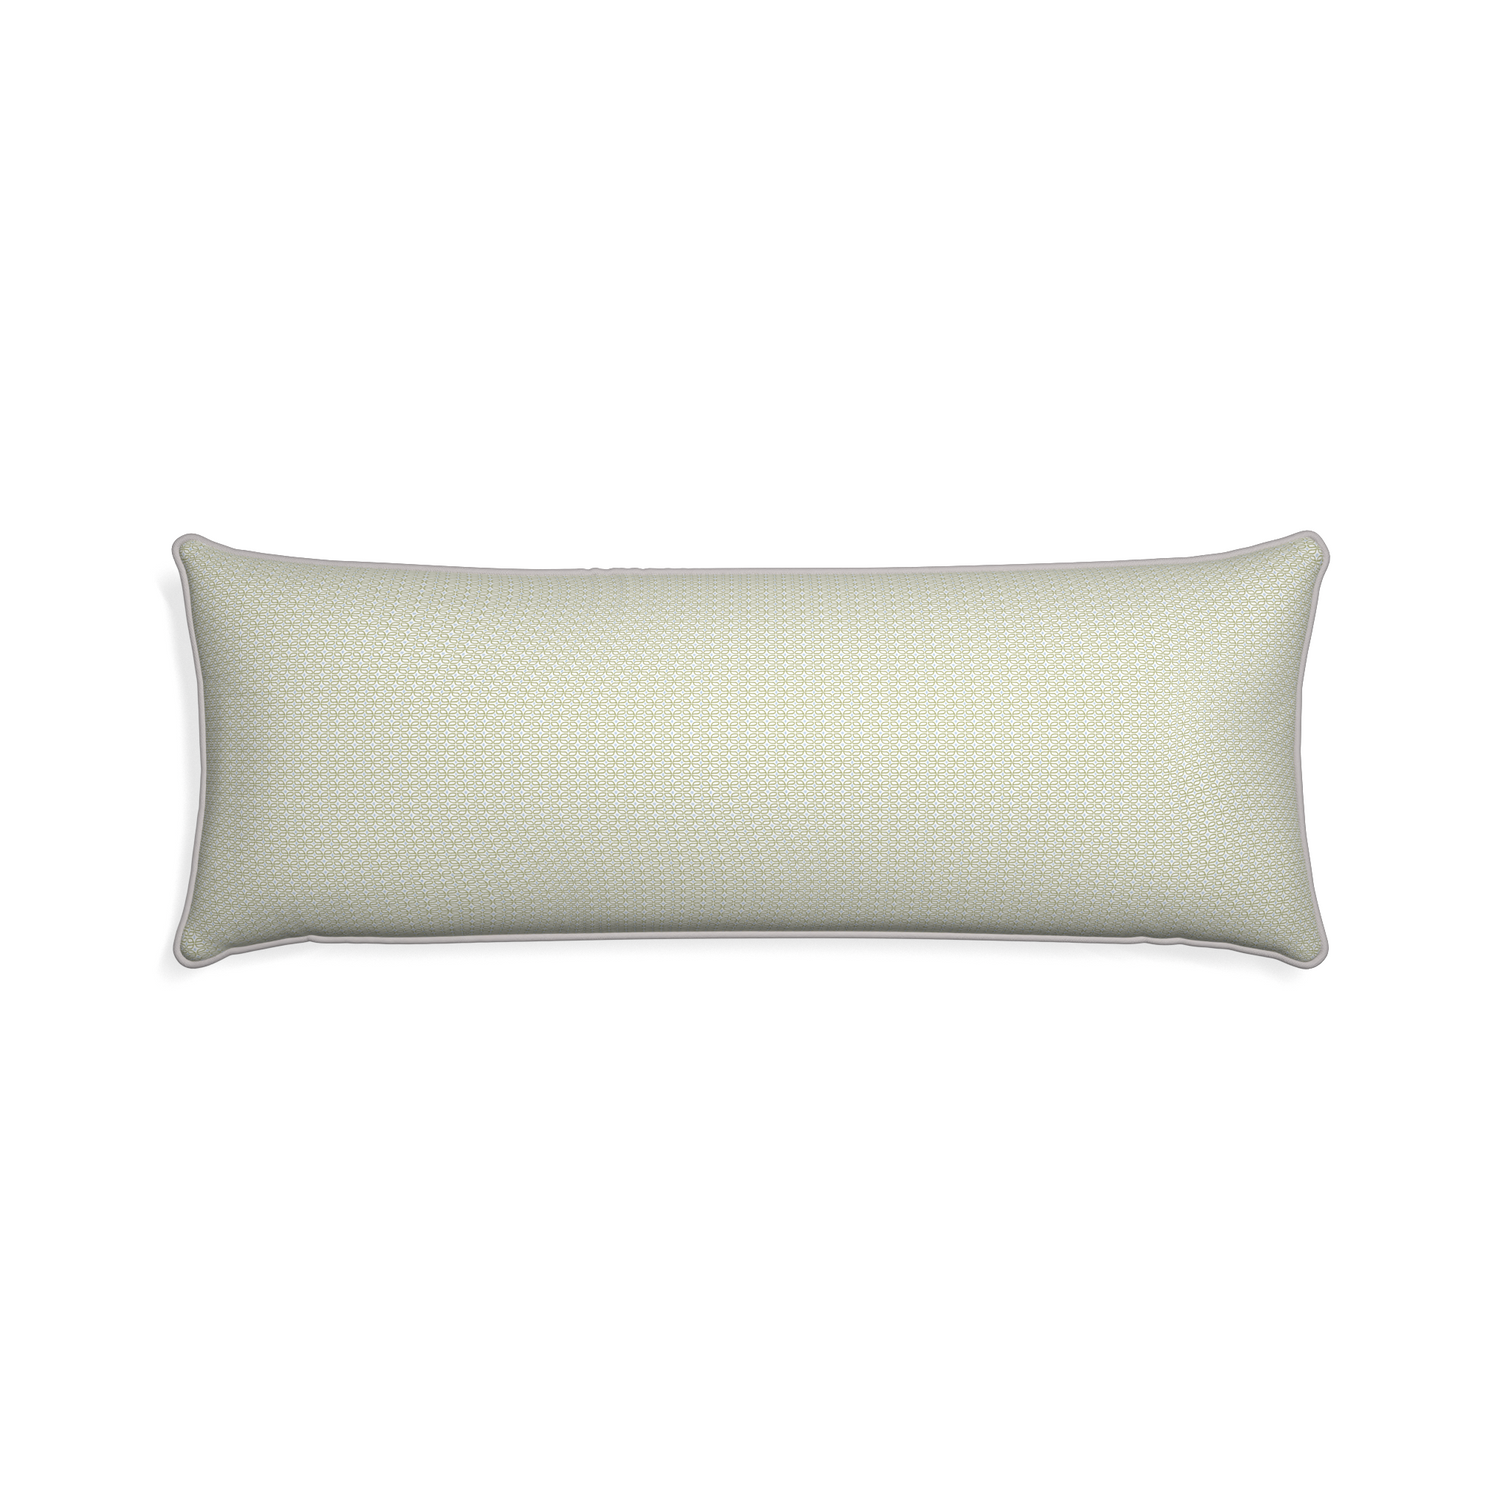 Xl-lumbar loomi moss custom moss green geometricpillow with pebble piping on white background